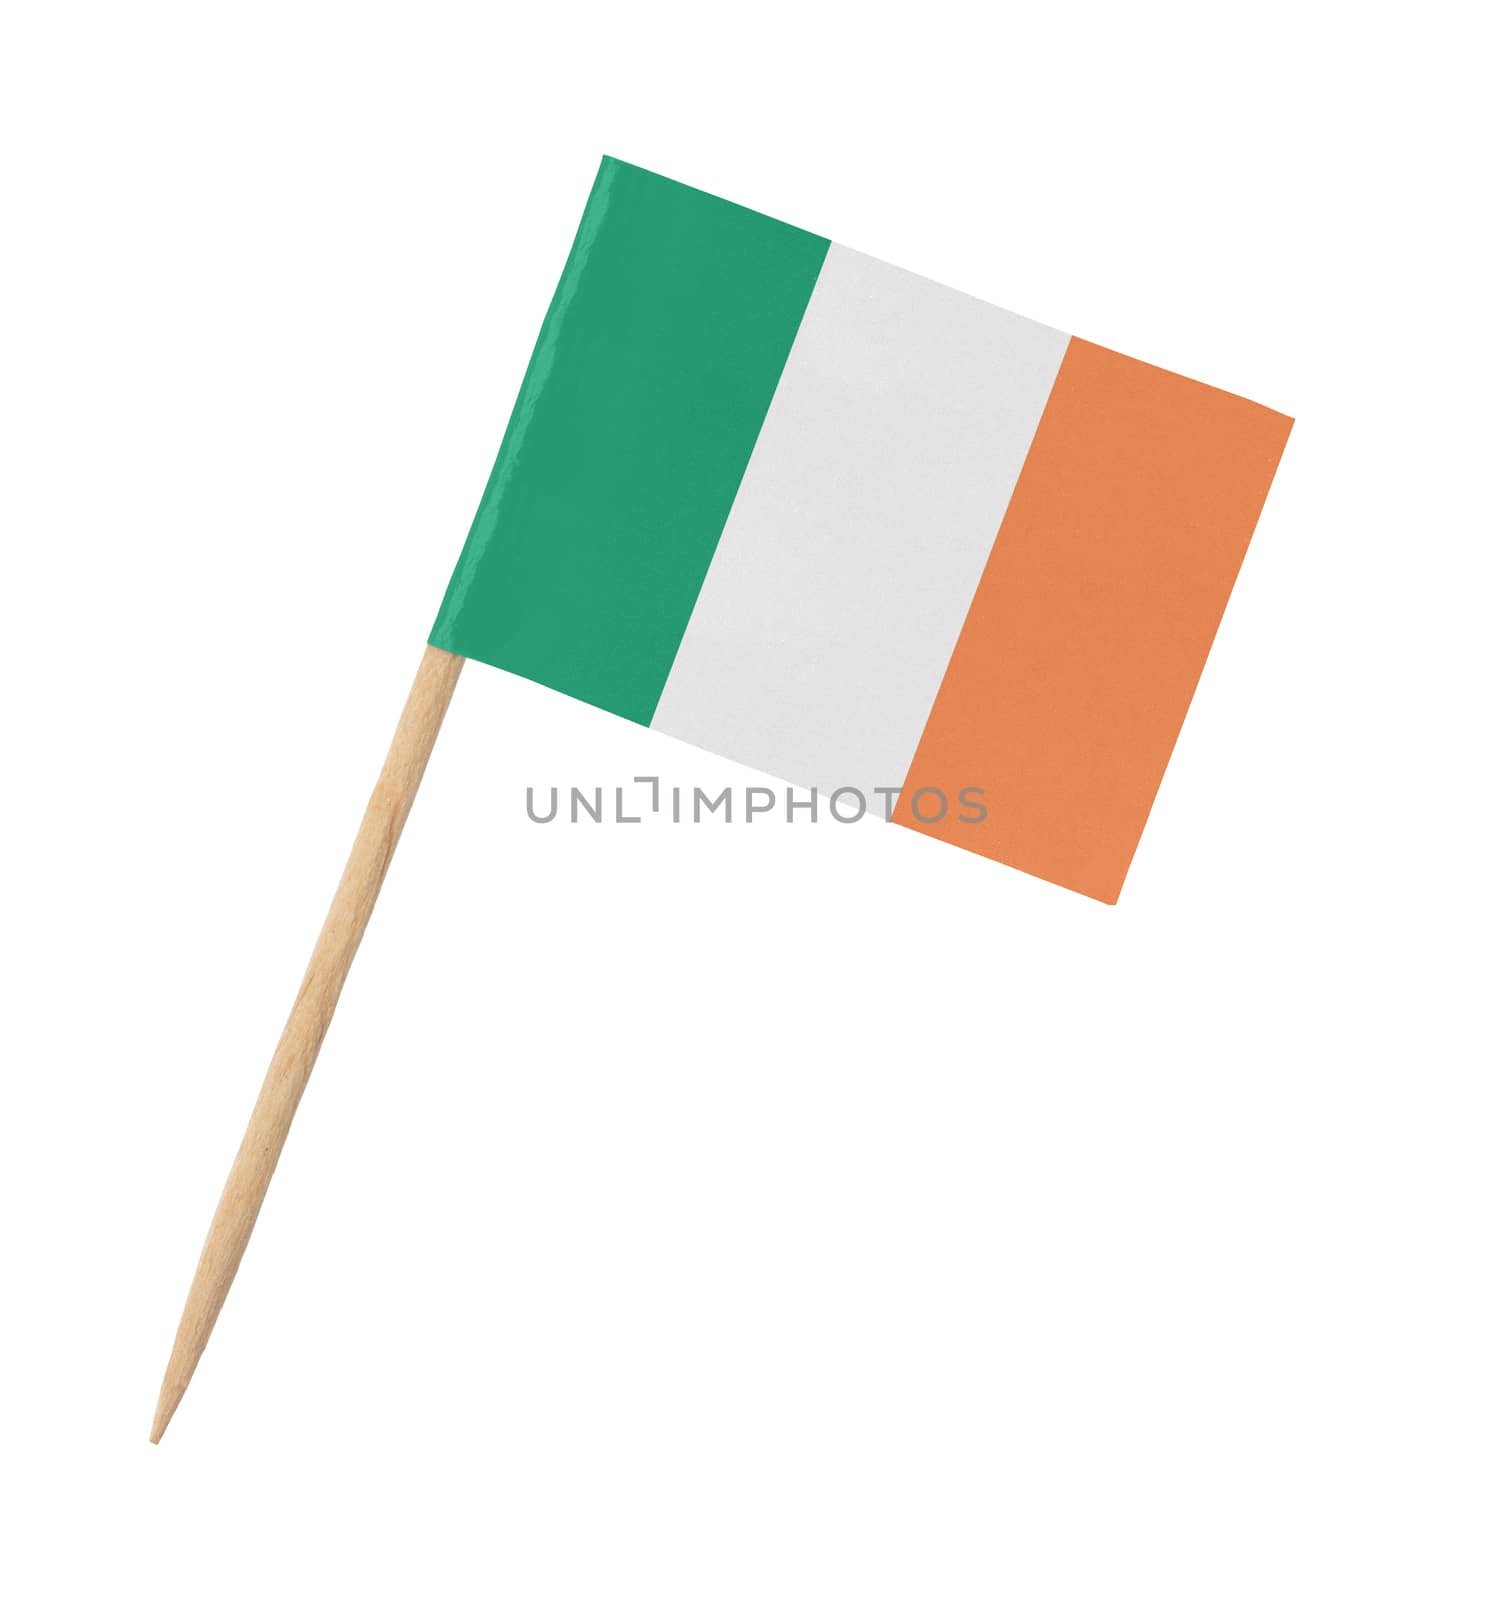 Small paper Irish flag on wooden stick by michaklootwijk